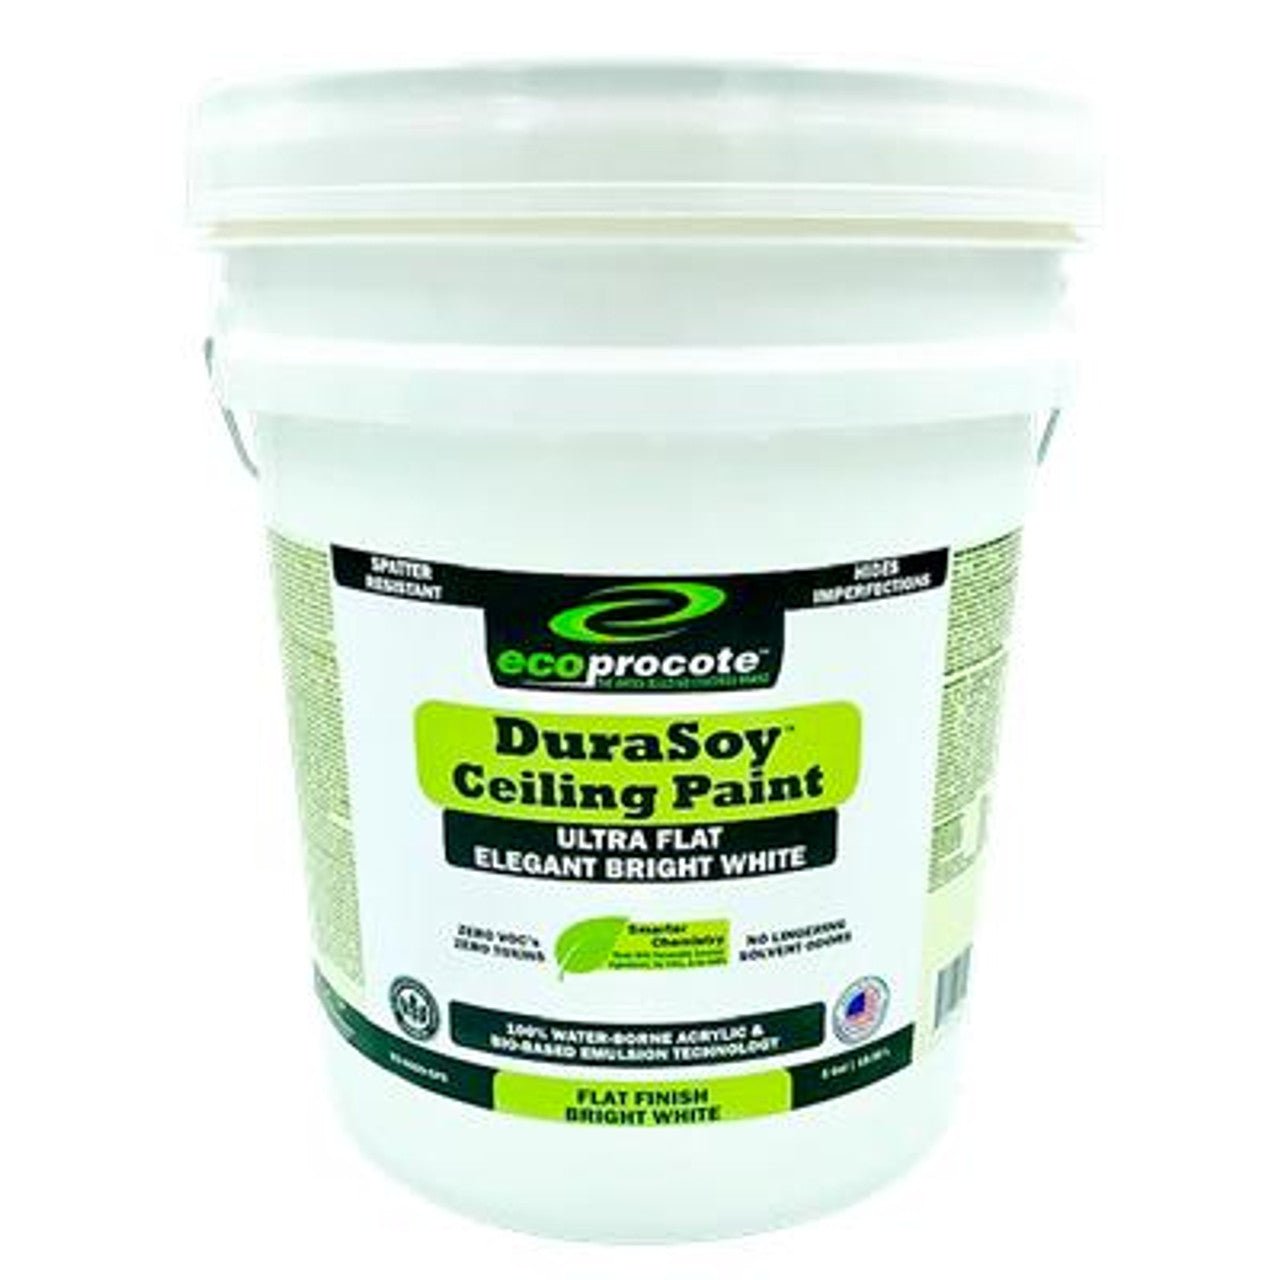 DuraSoy Ceiling Paint, Bright White, Flat